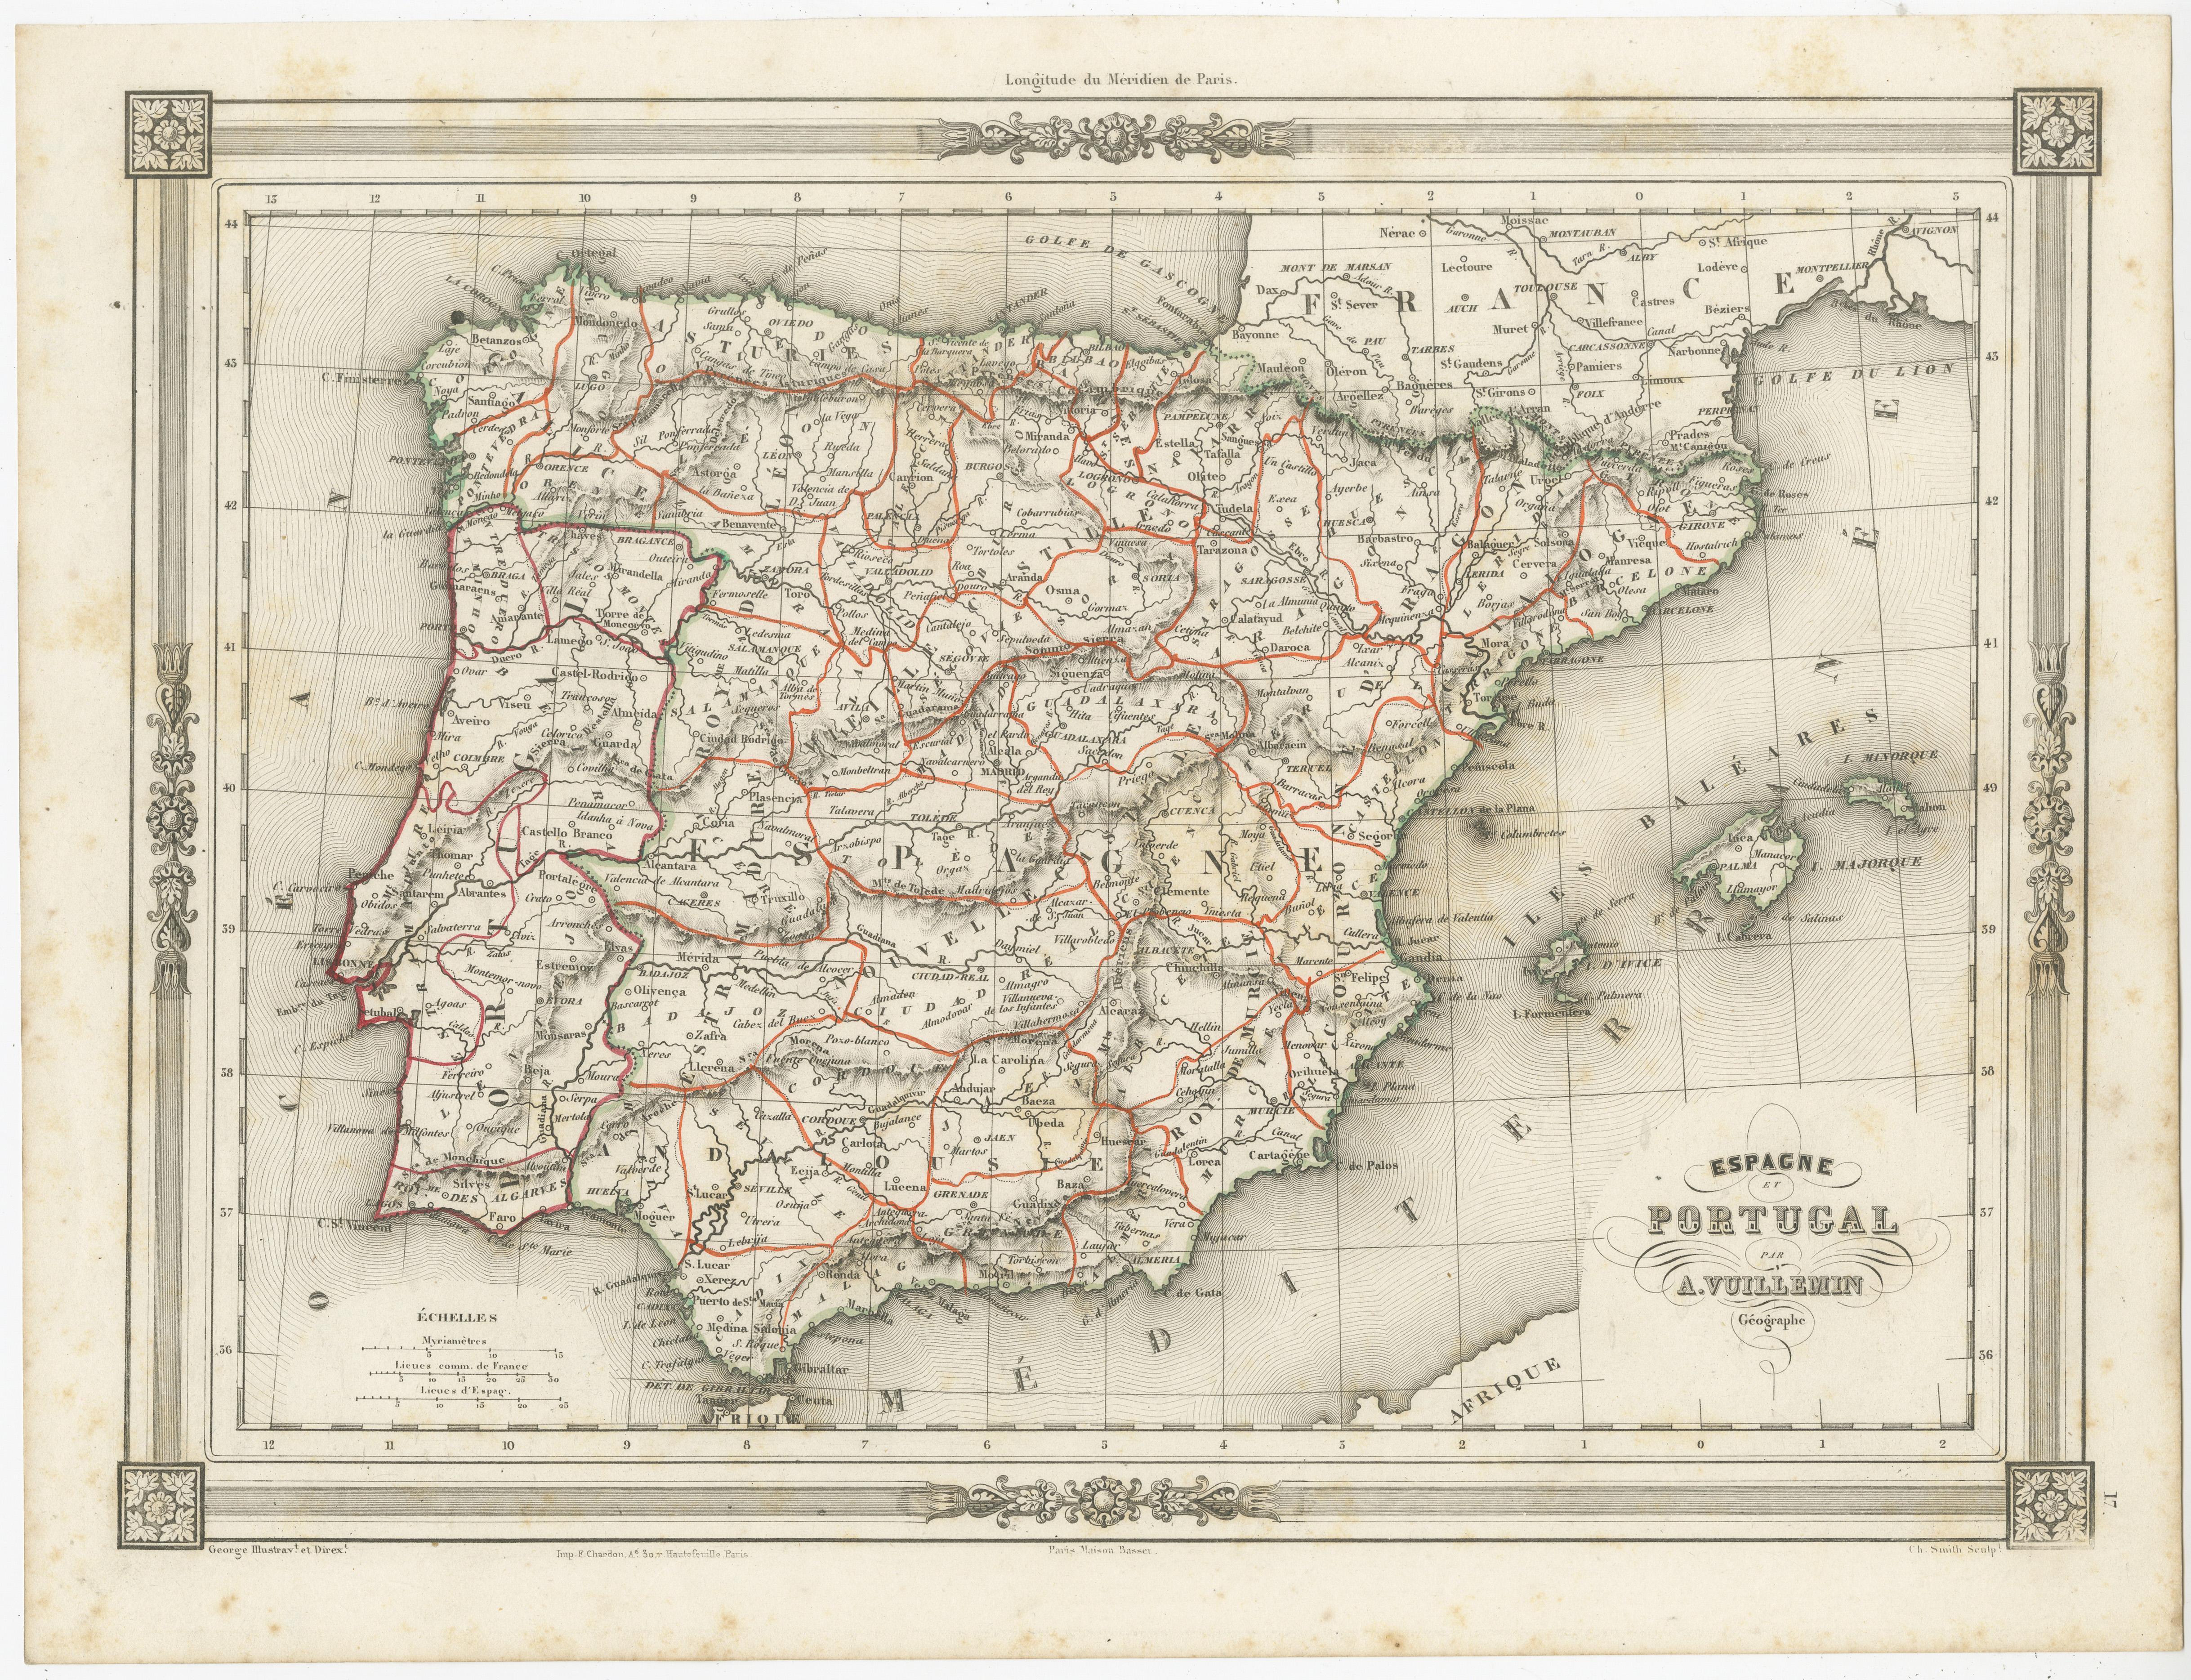 Antique map titled 'Espagne et Portugal'. Attractive map of Spain and Portugal. The map covers all of Spain and Portugal from France to the Mediterranean Sea and includes the Balearic Islands of Ibiza, Majorca, and Minorca. This map originates from